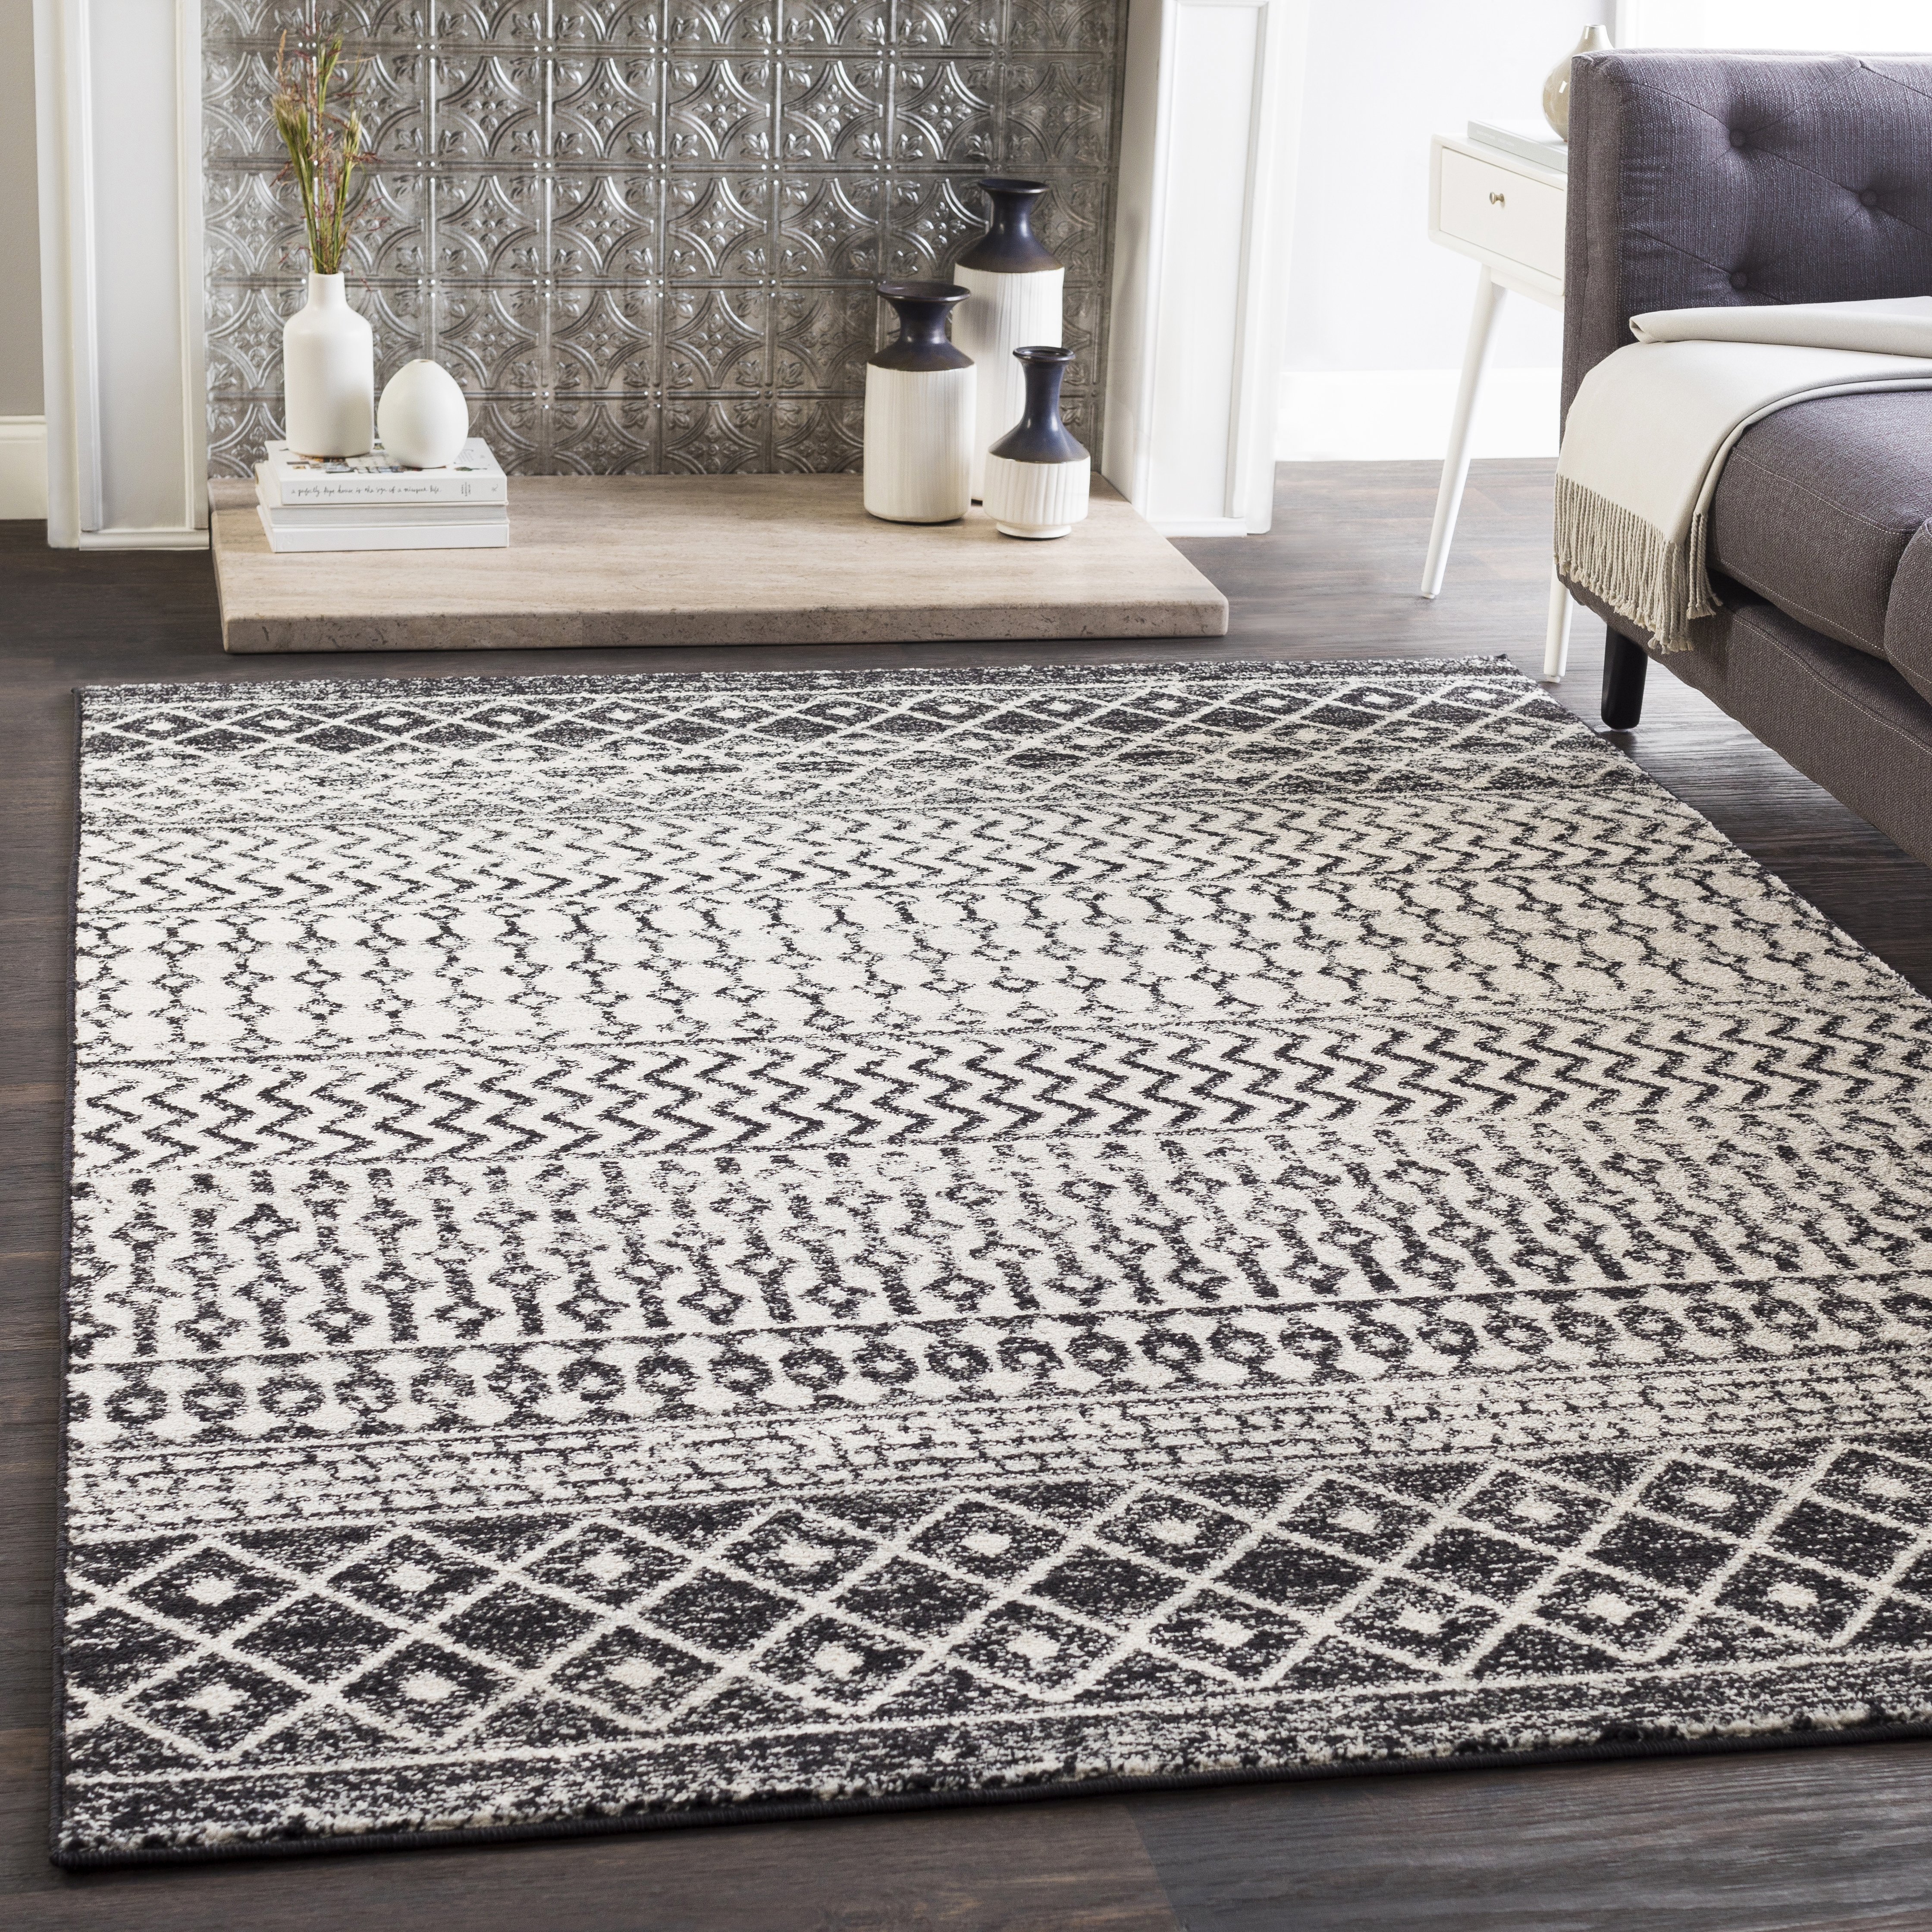 The Elaziz Collection feautures compelling global inspired designs brimming with elegance and grace! The perfect addition for any home, these pieces will add eclectic charm to any room! The meticulously woven construction of these pieces boasts durability - Image 1